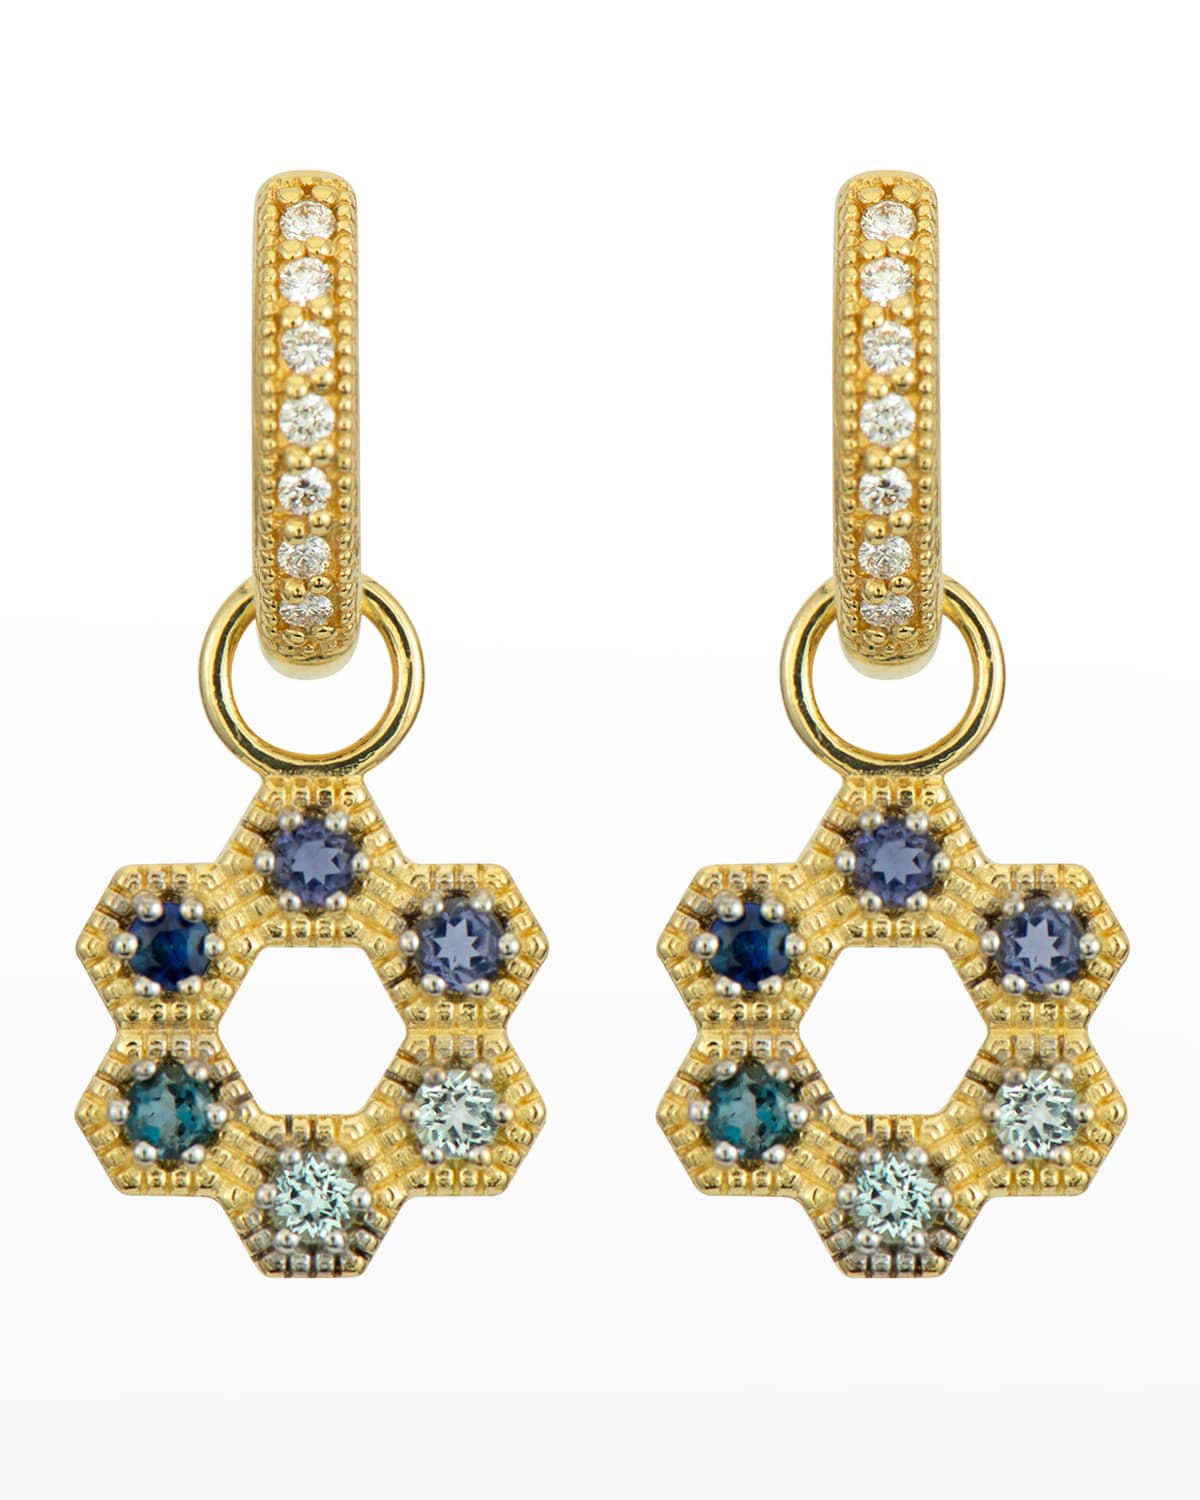 Jude Frances Provence Open Hexagon Stone Earring Charms in Shades of Blue Topaz